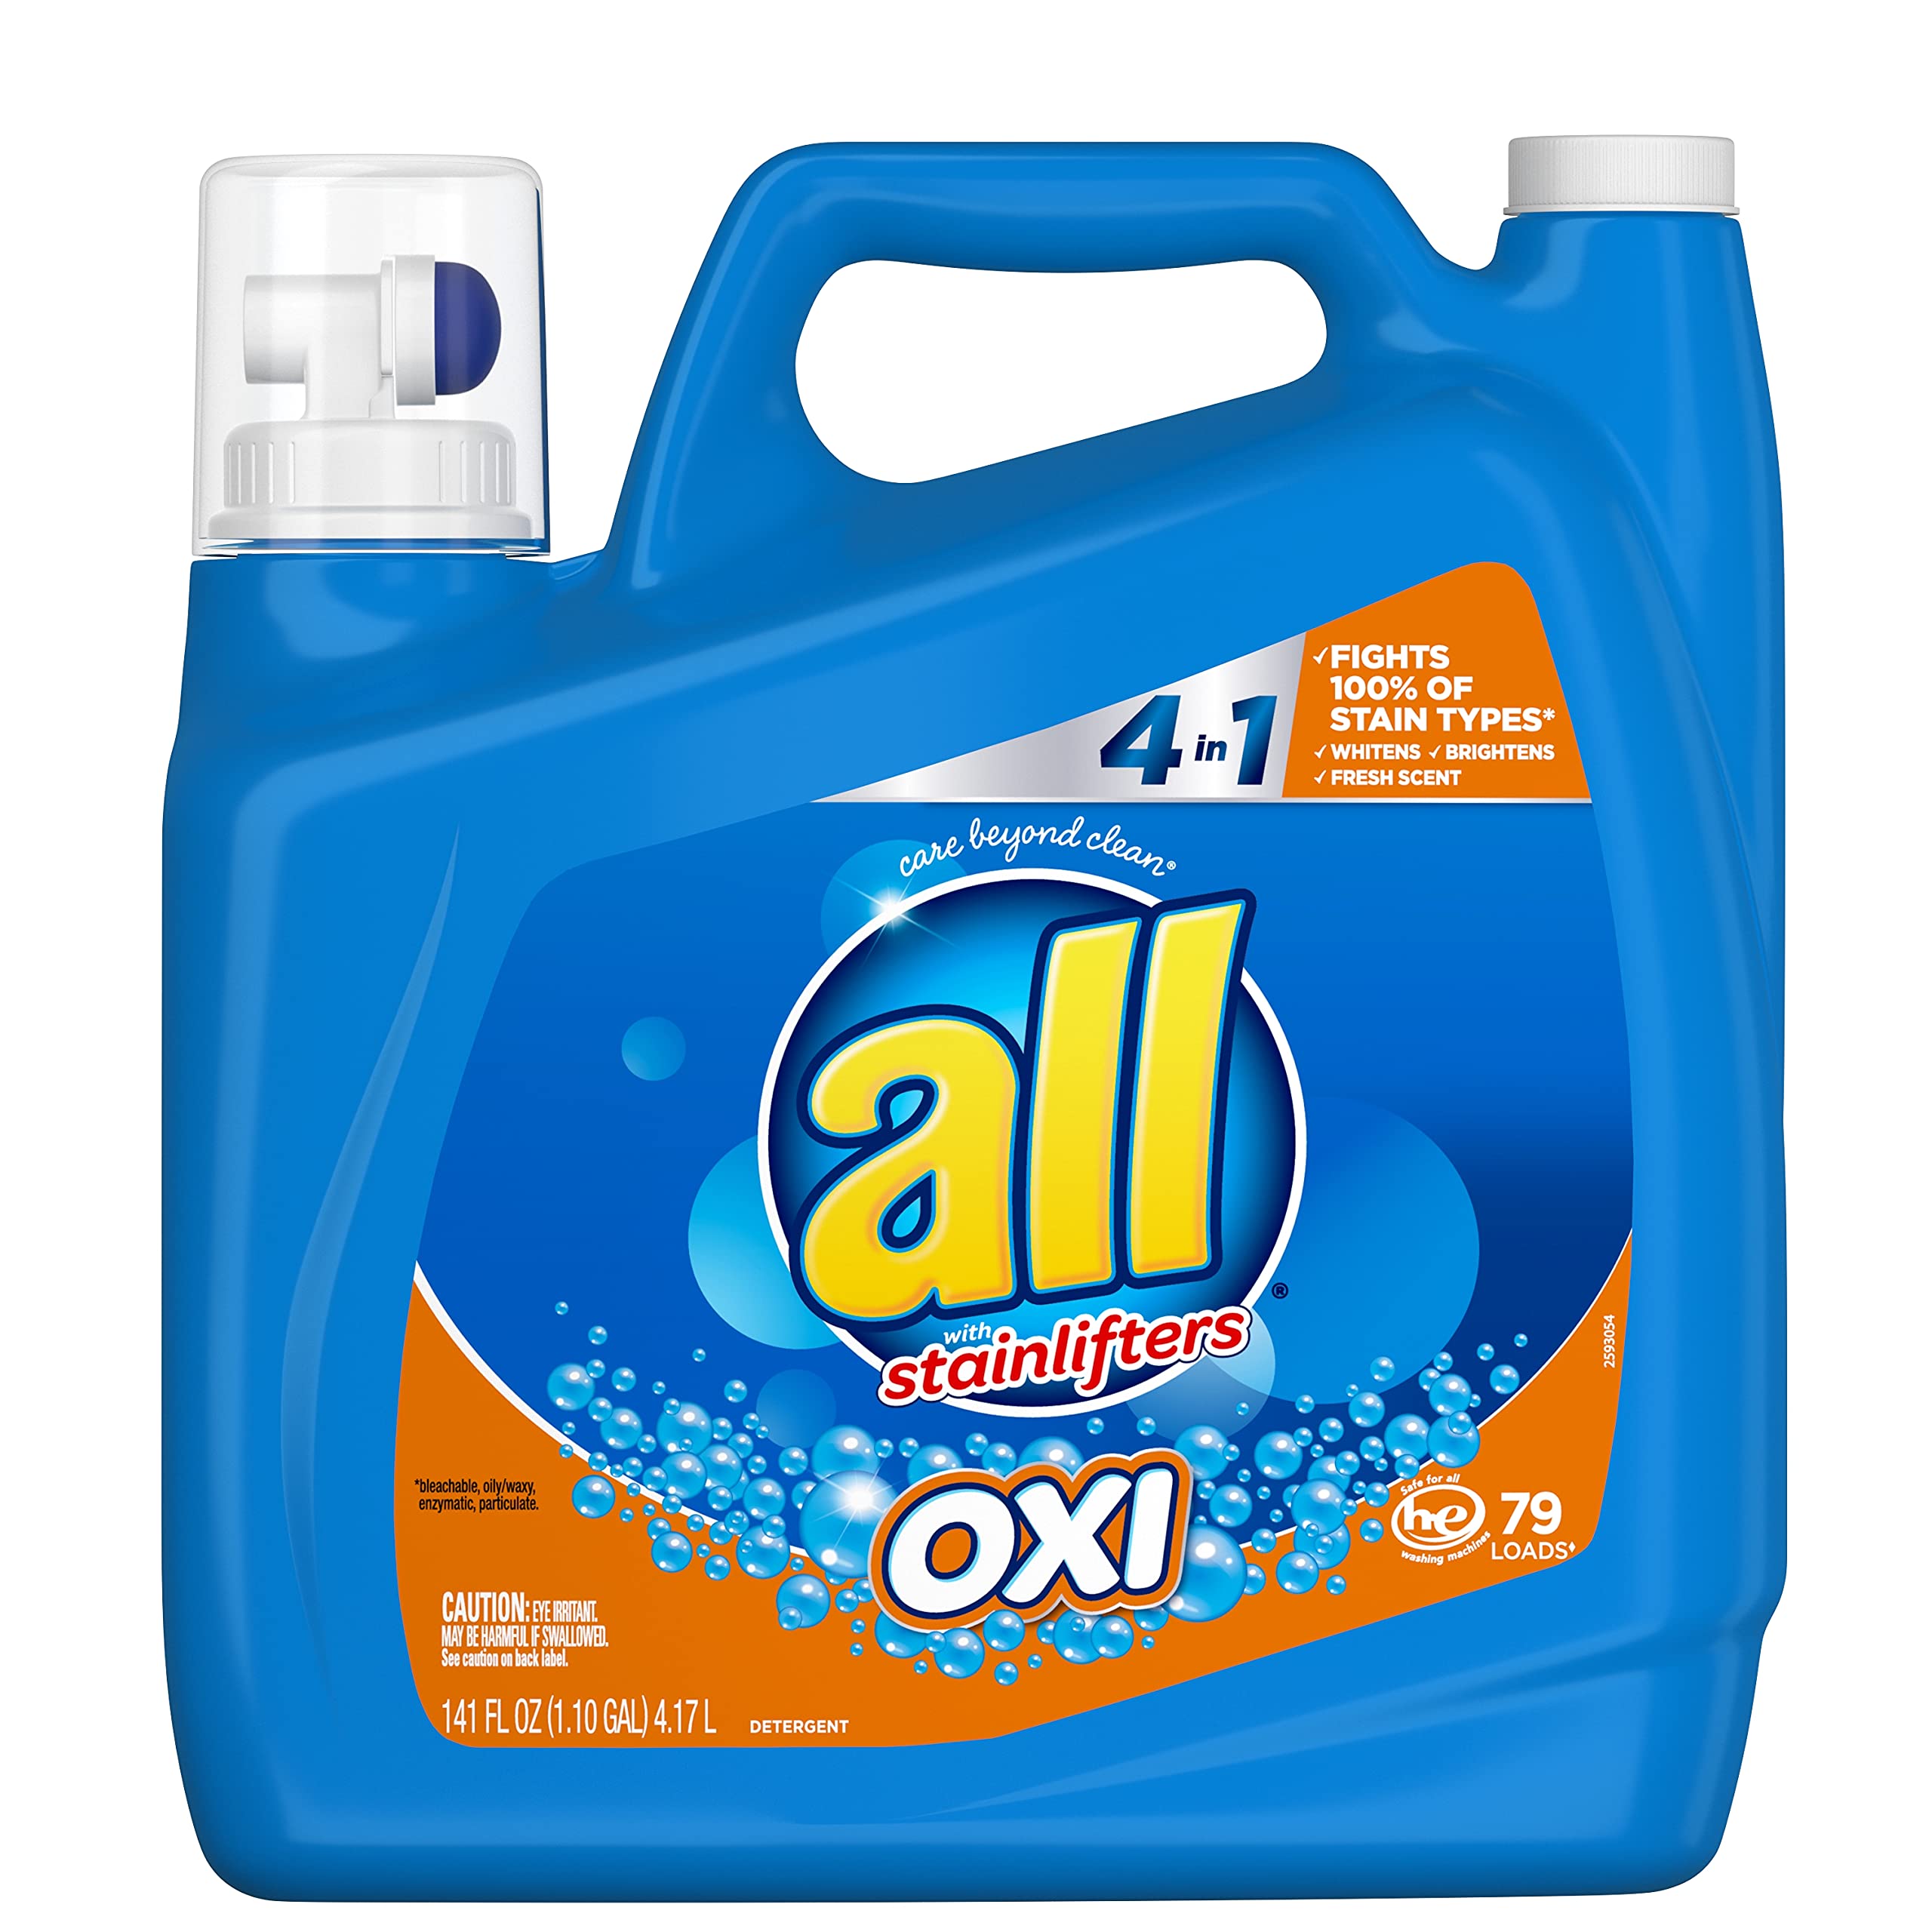 Book Cover All Liquid Laundry Detergent with OXI Stain Removers and Whiteners, 141 Fluid Ounces, 79 Loads OXI 141 Fl Oz (Pack of 1)